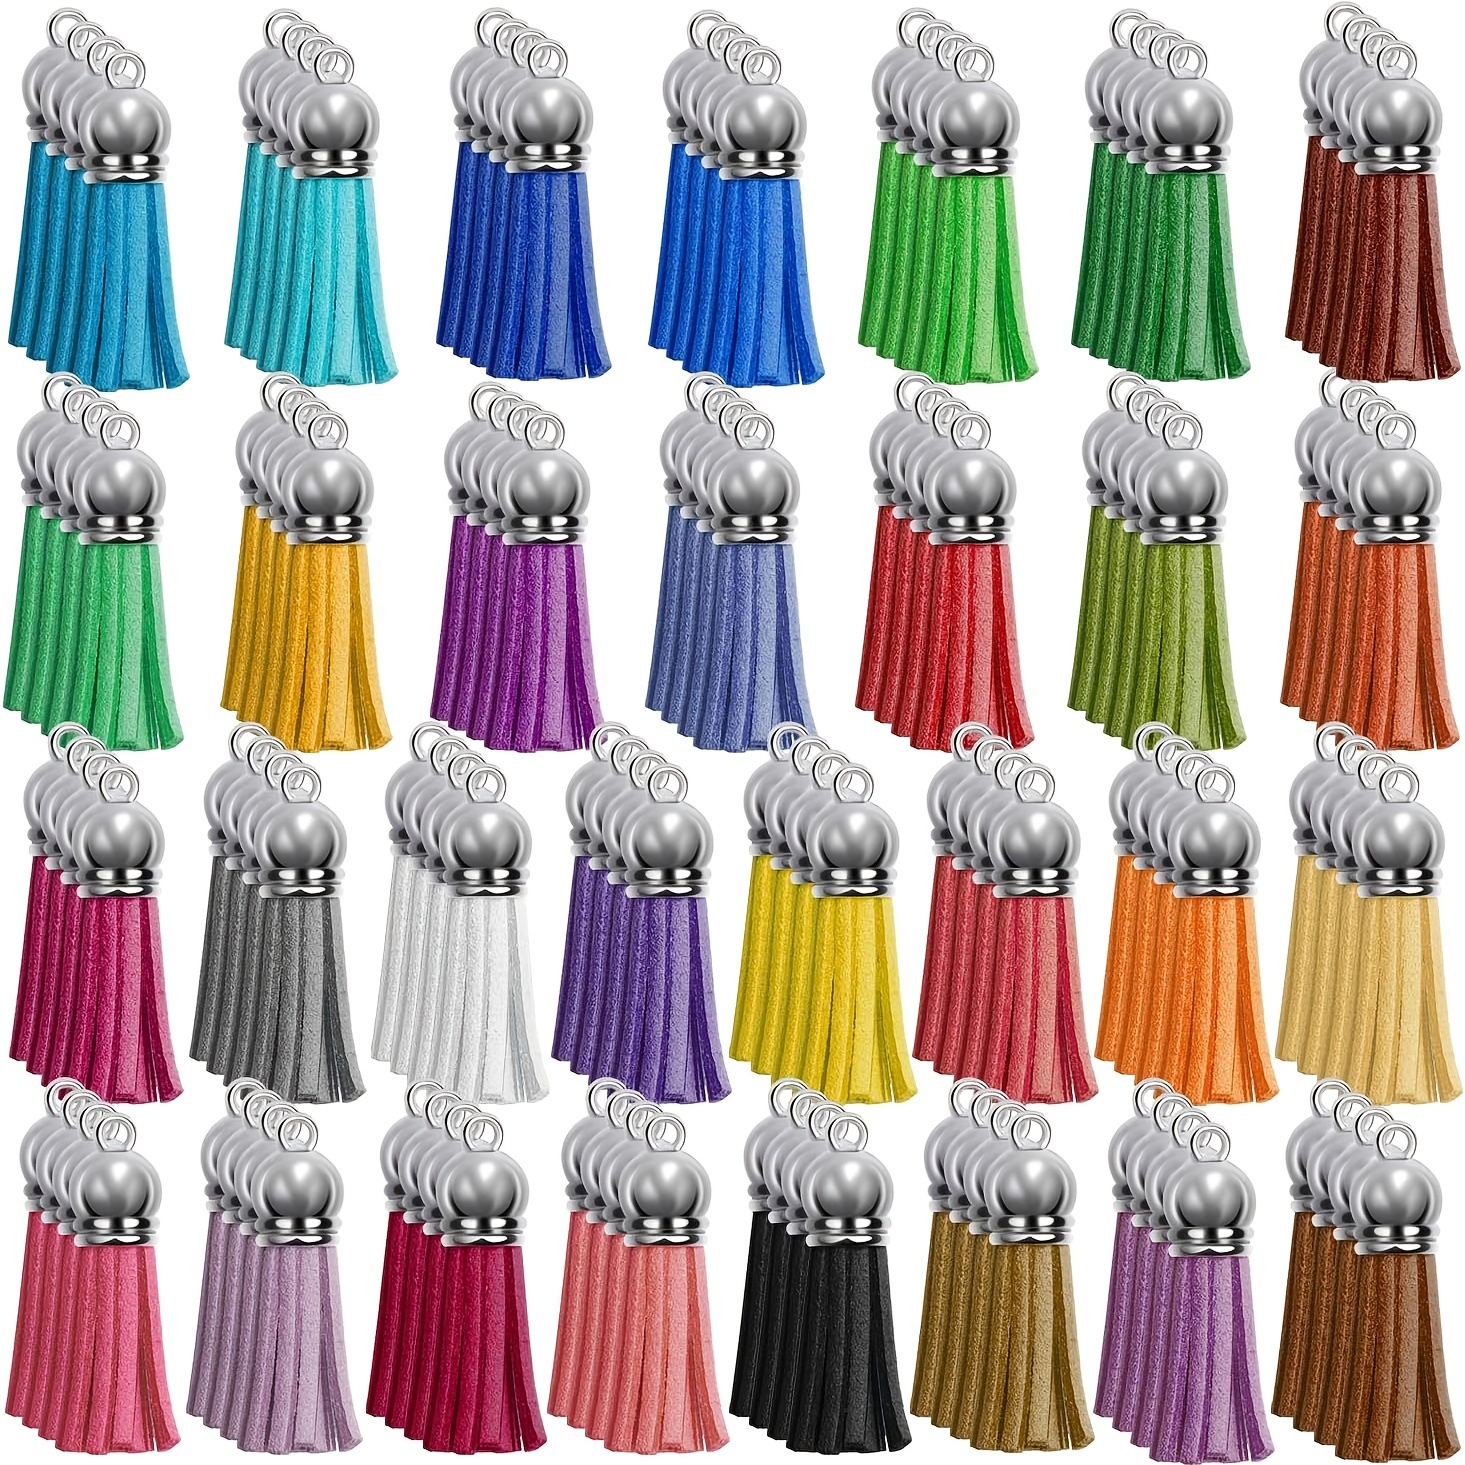  DIYASY Keychain Tassels,100 Pcs Bulk Leather Tassels for  Jewelry Making Colored Tassel Pendant for Keychain Accessories Craft and  Earrings Bracelets Making 25 Colors